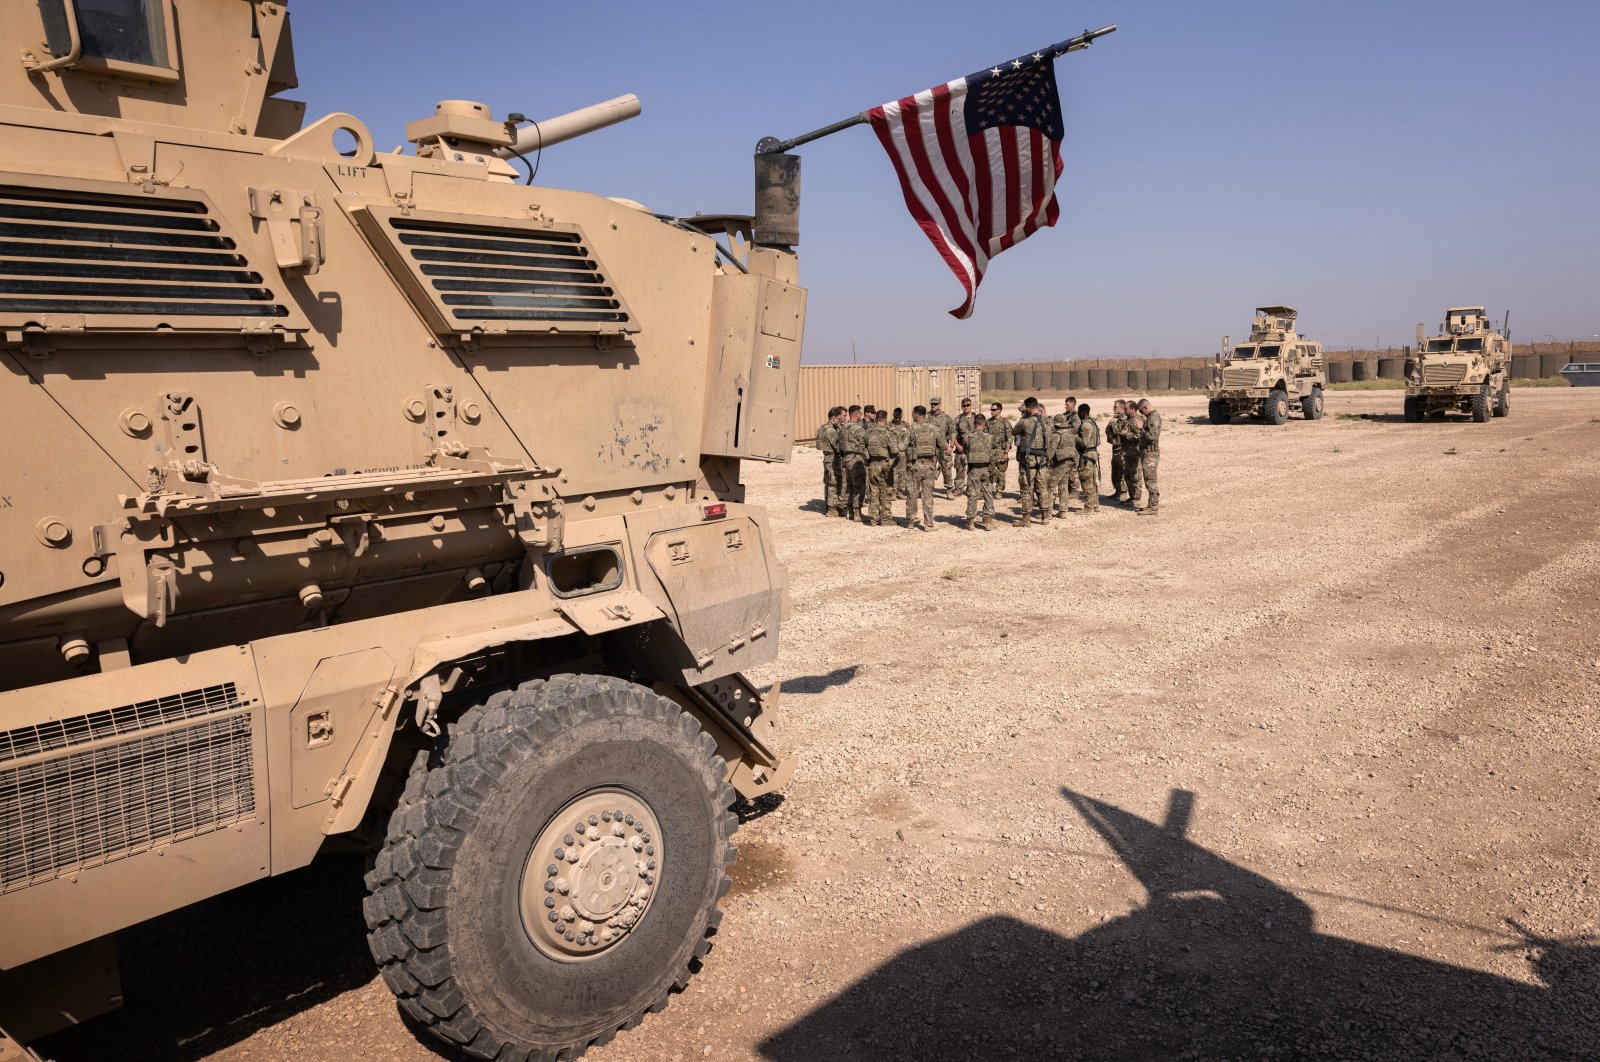 U.S. Army soldiers prepare to go out on patrol from a remote combat outpost in northeastern Syria, May 25, 2021. (Getty Images Photo)